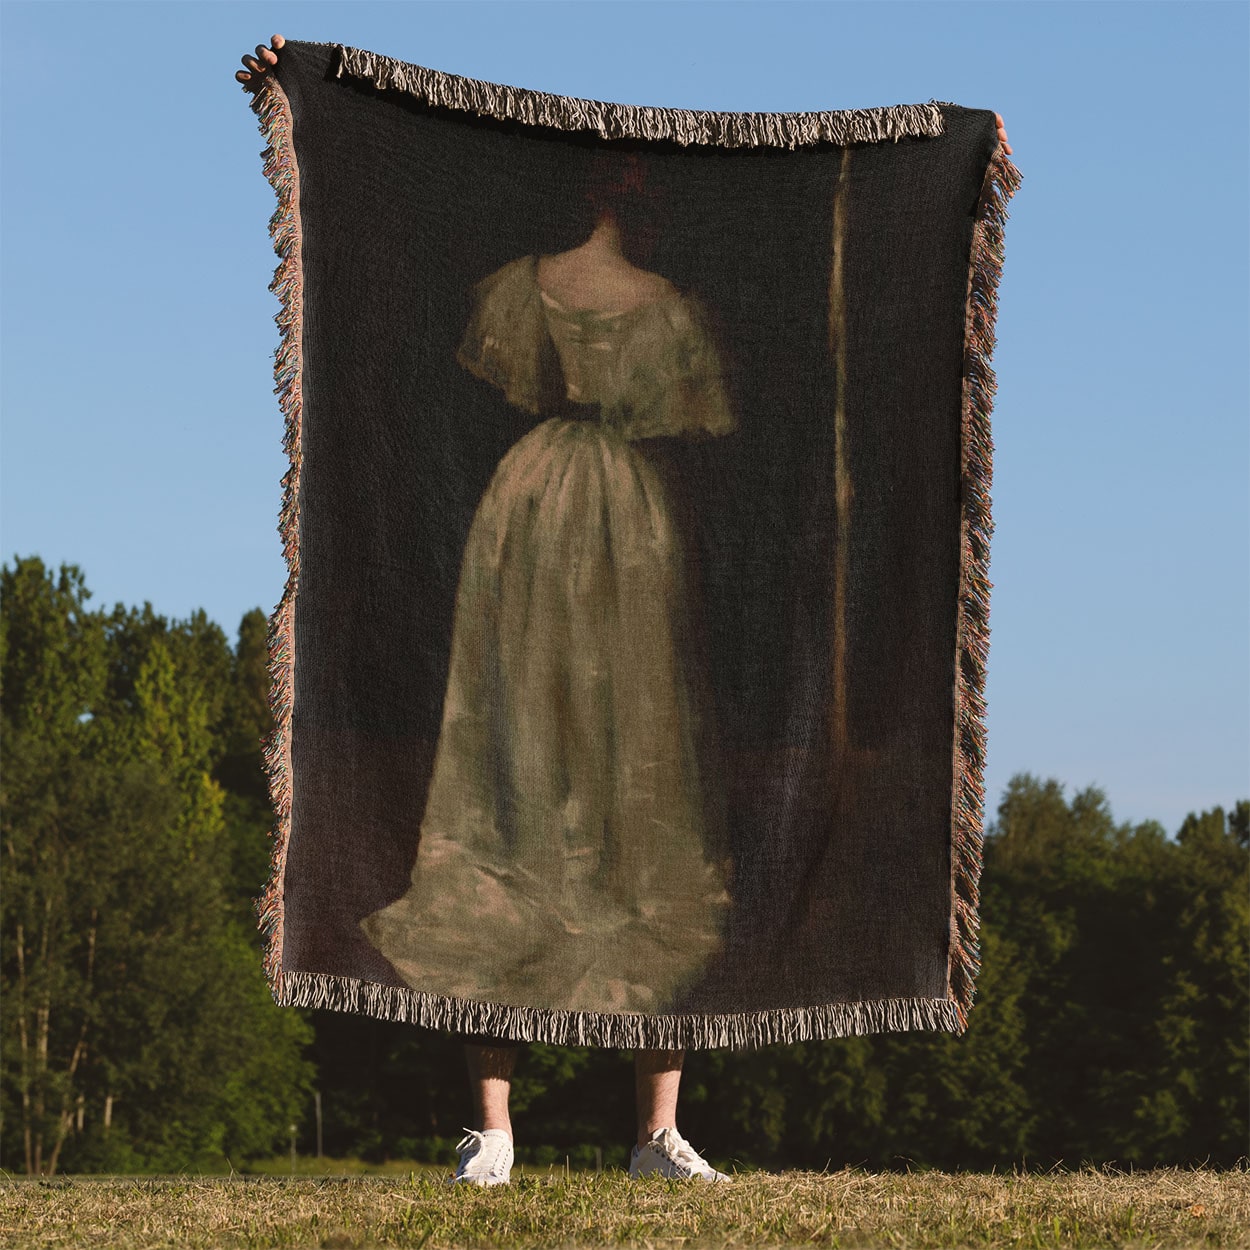 Woman in a White Dress Woven Blanket Held Up Outside